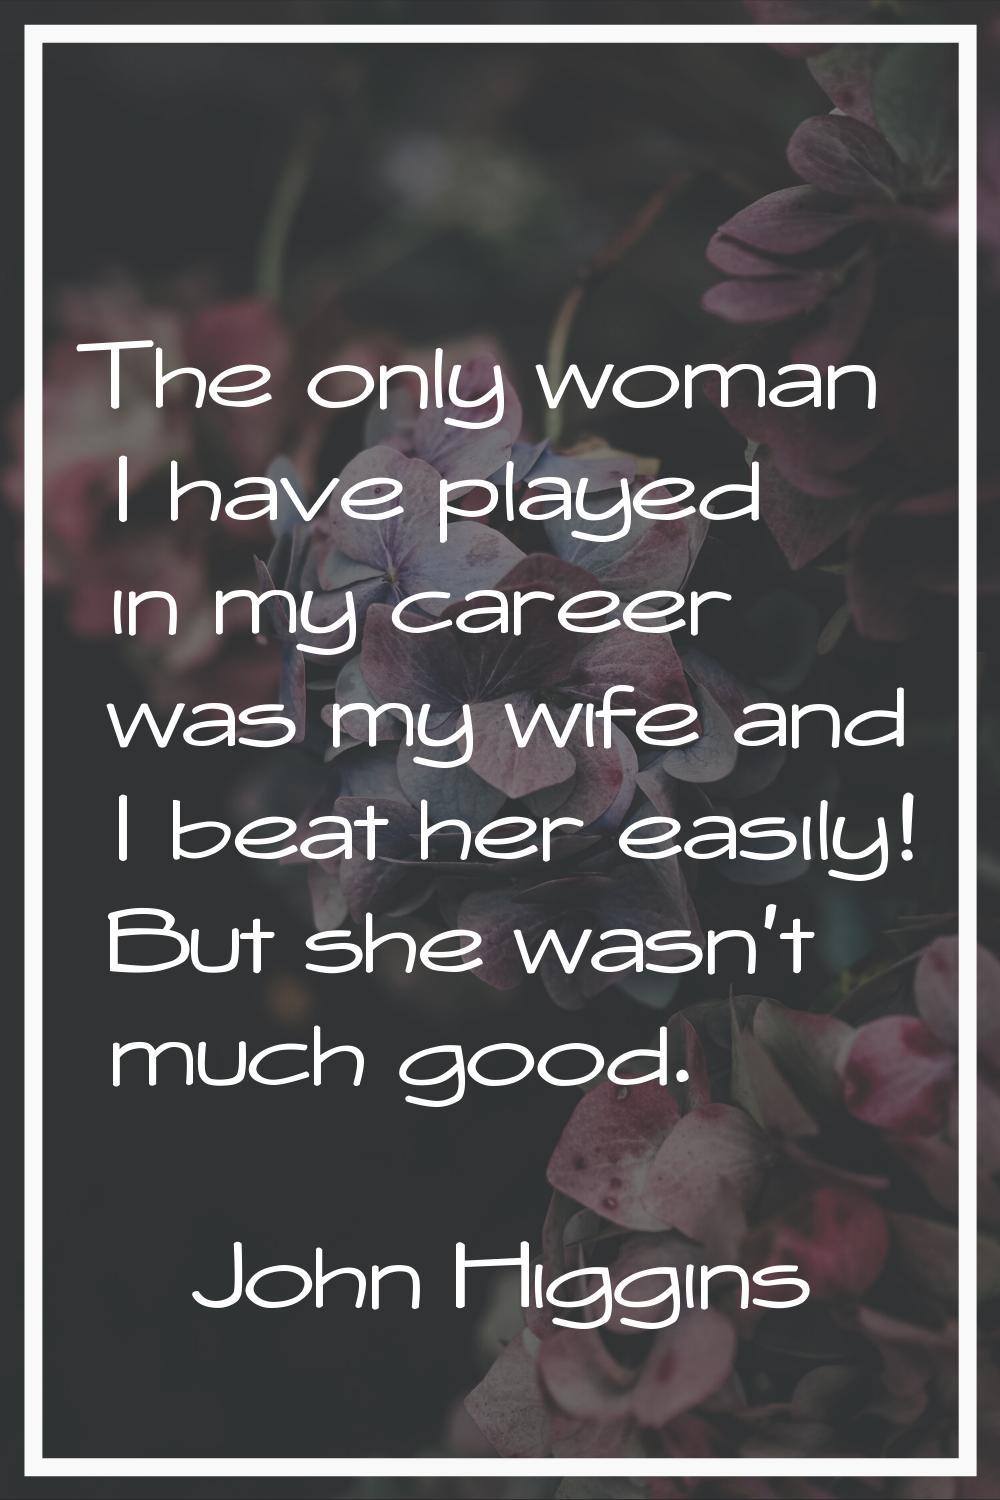 The only woman I have played in my career was my wife and I beat her easily! But she wasn't much go